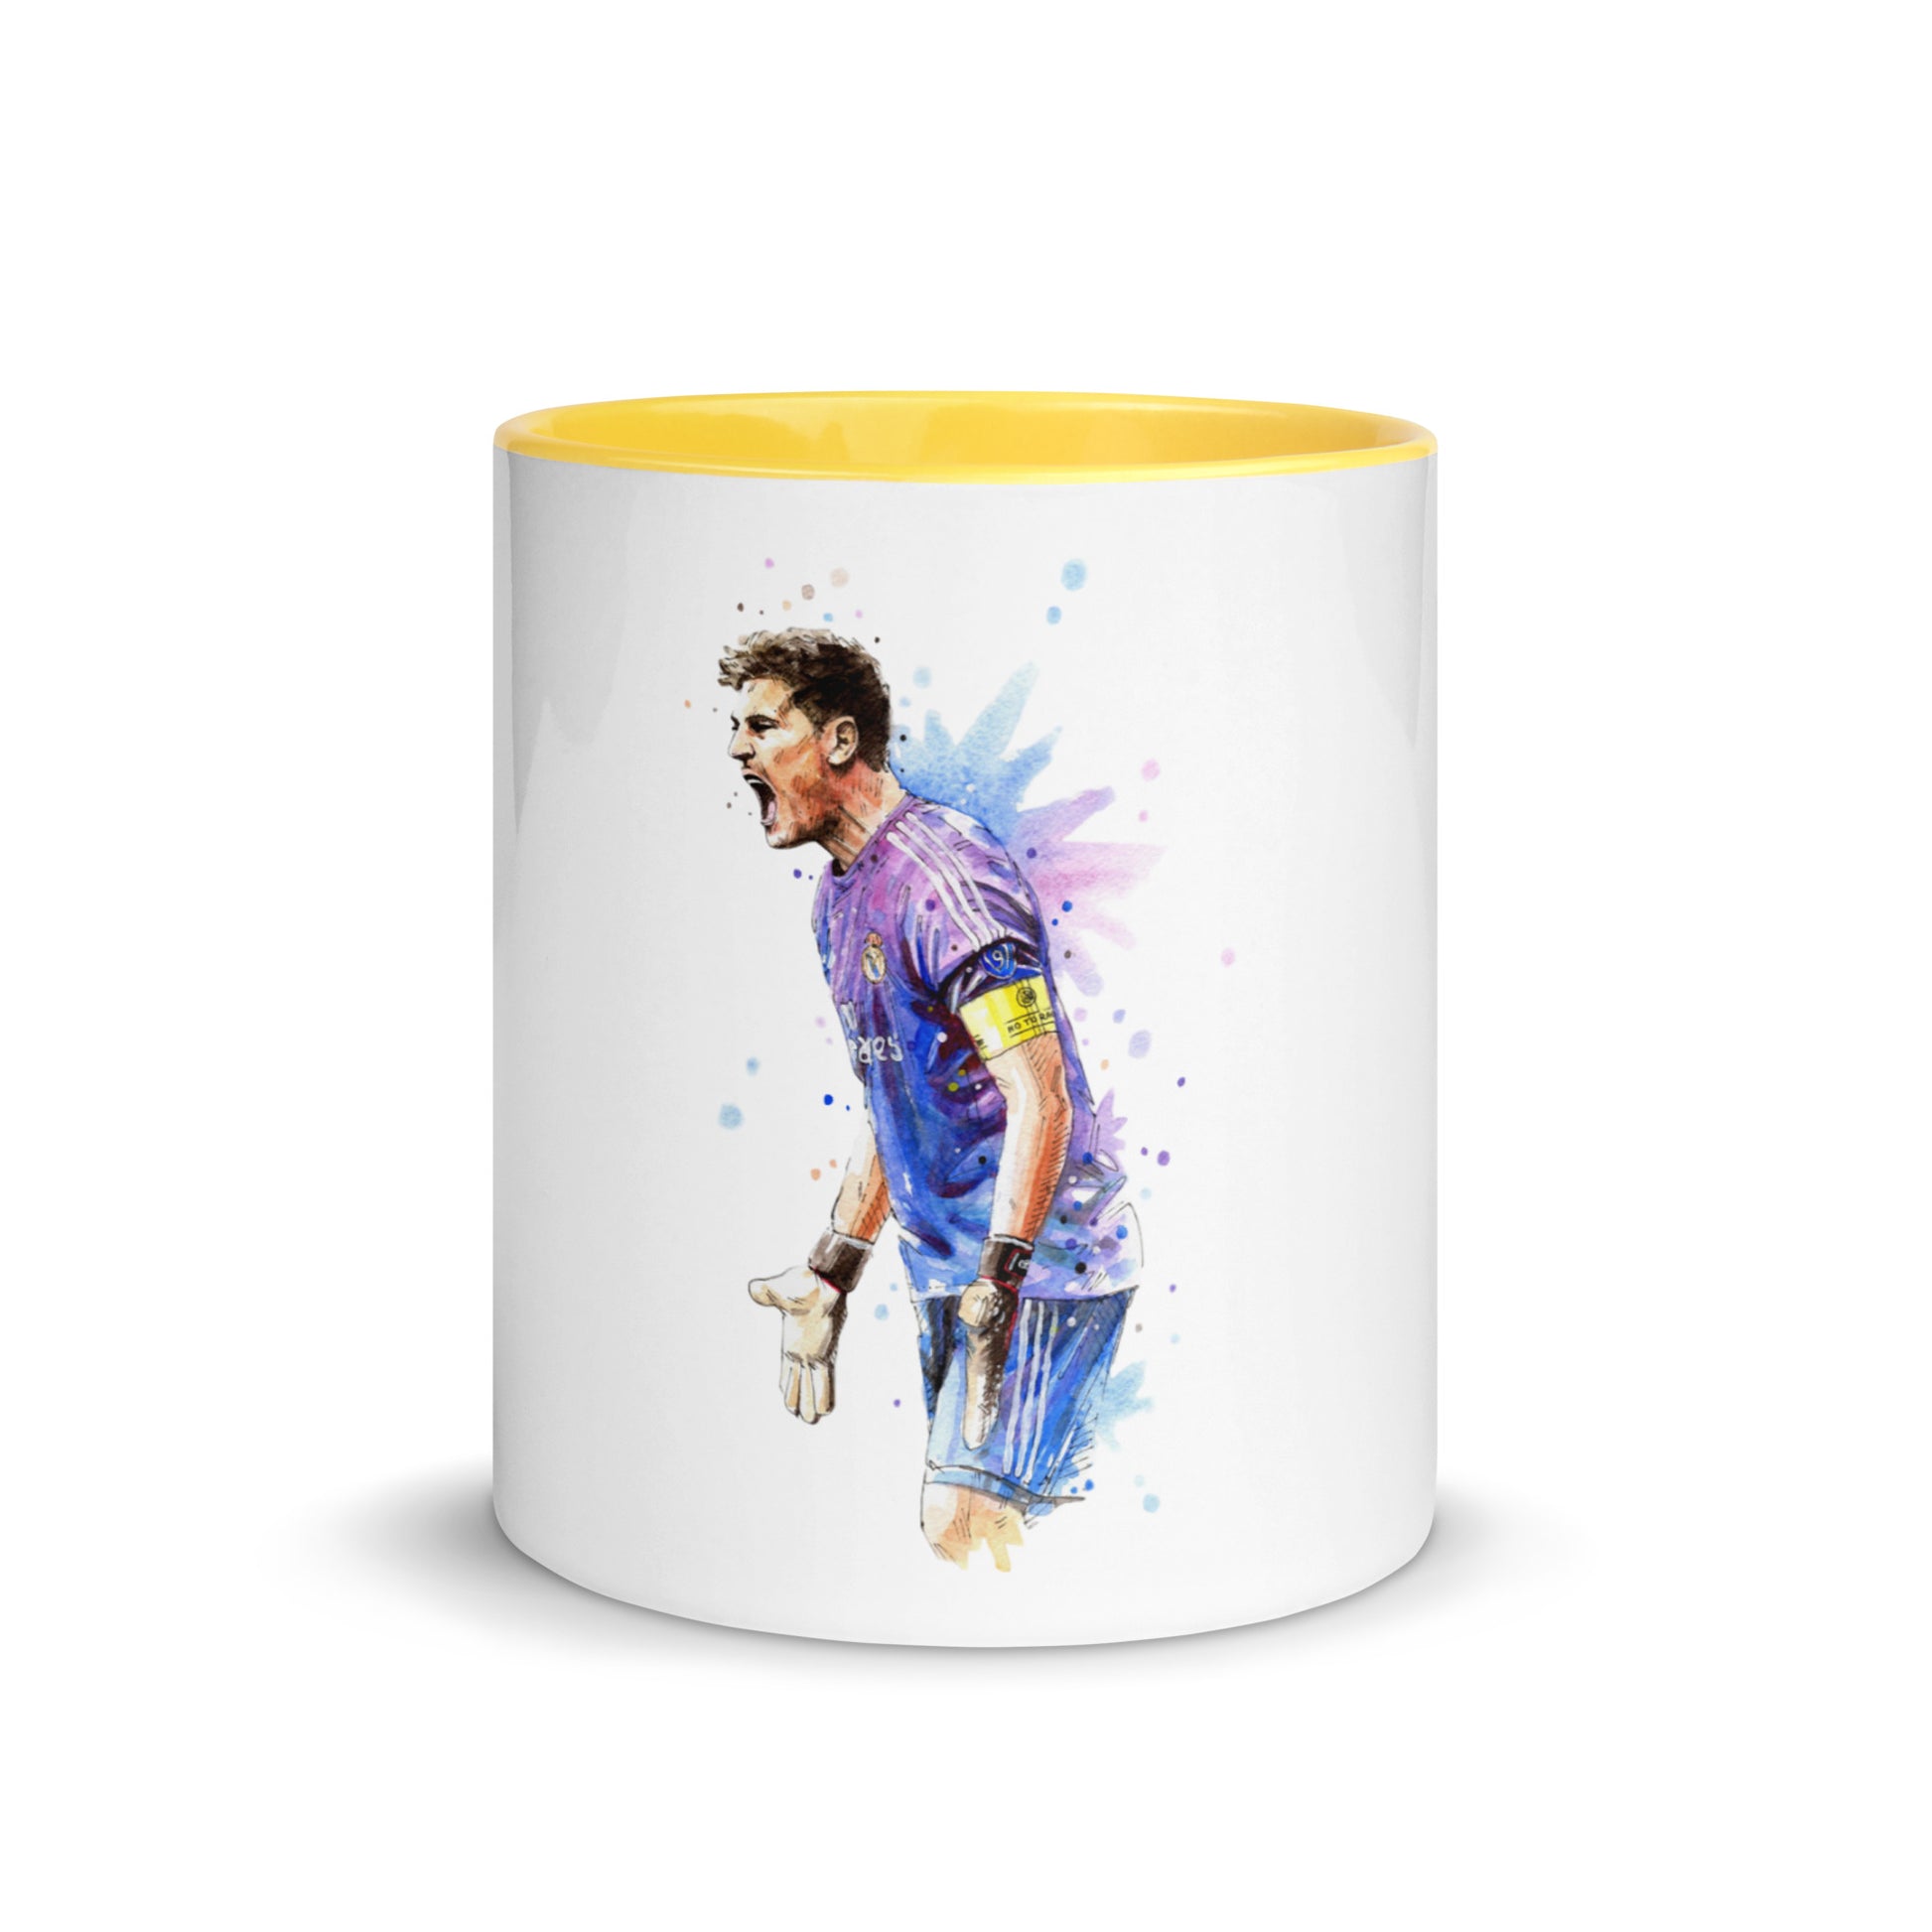 Real Madrid Legend Casillas Vintage Coffee  Mug with Color Inside - The 90+ Minute